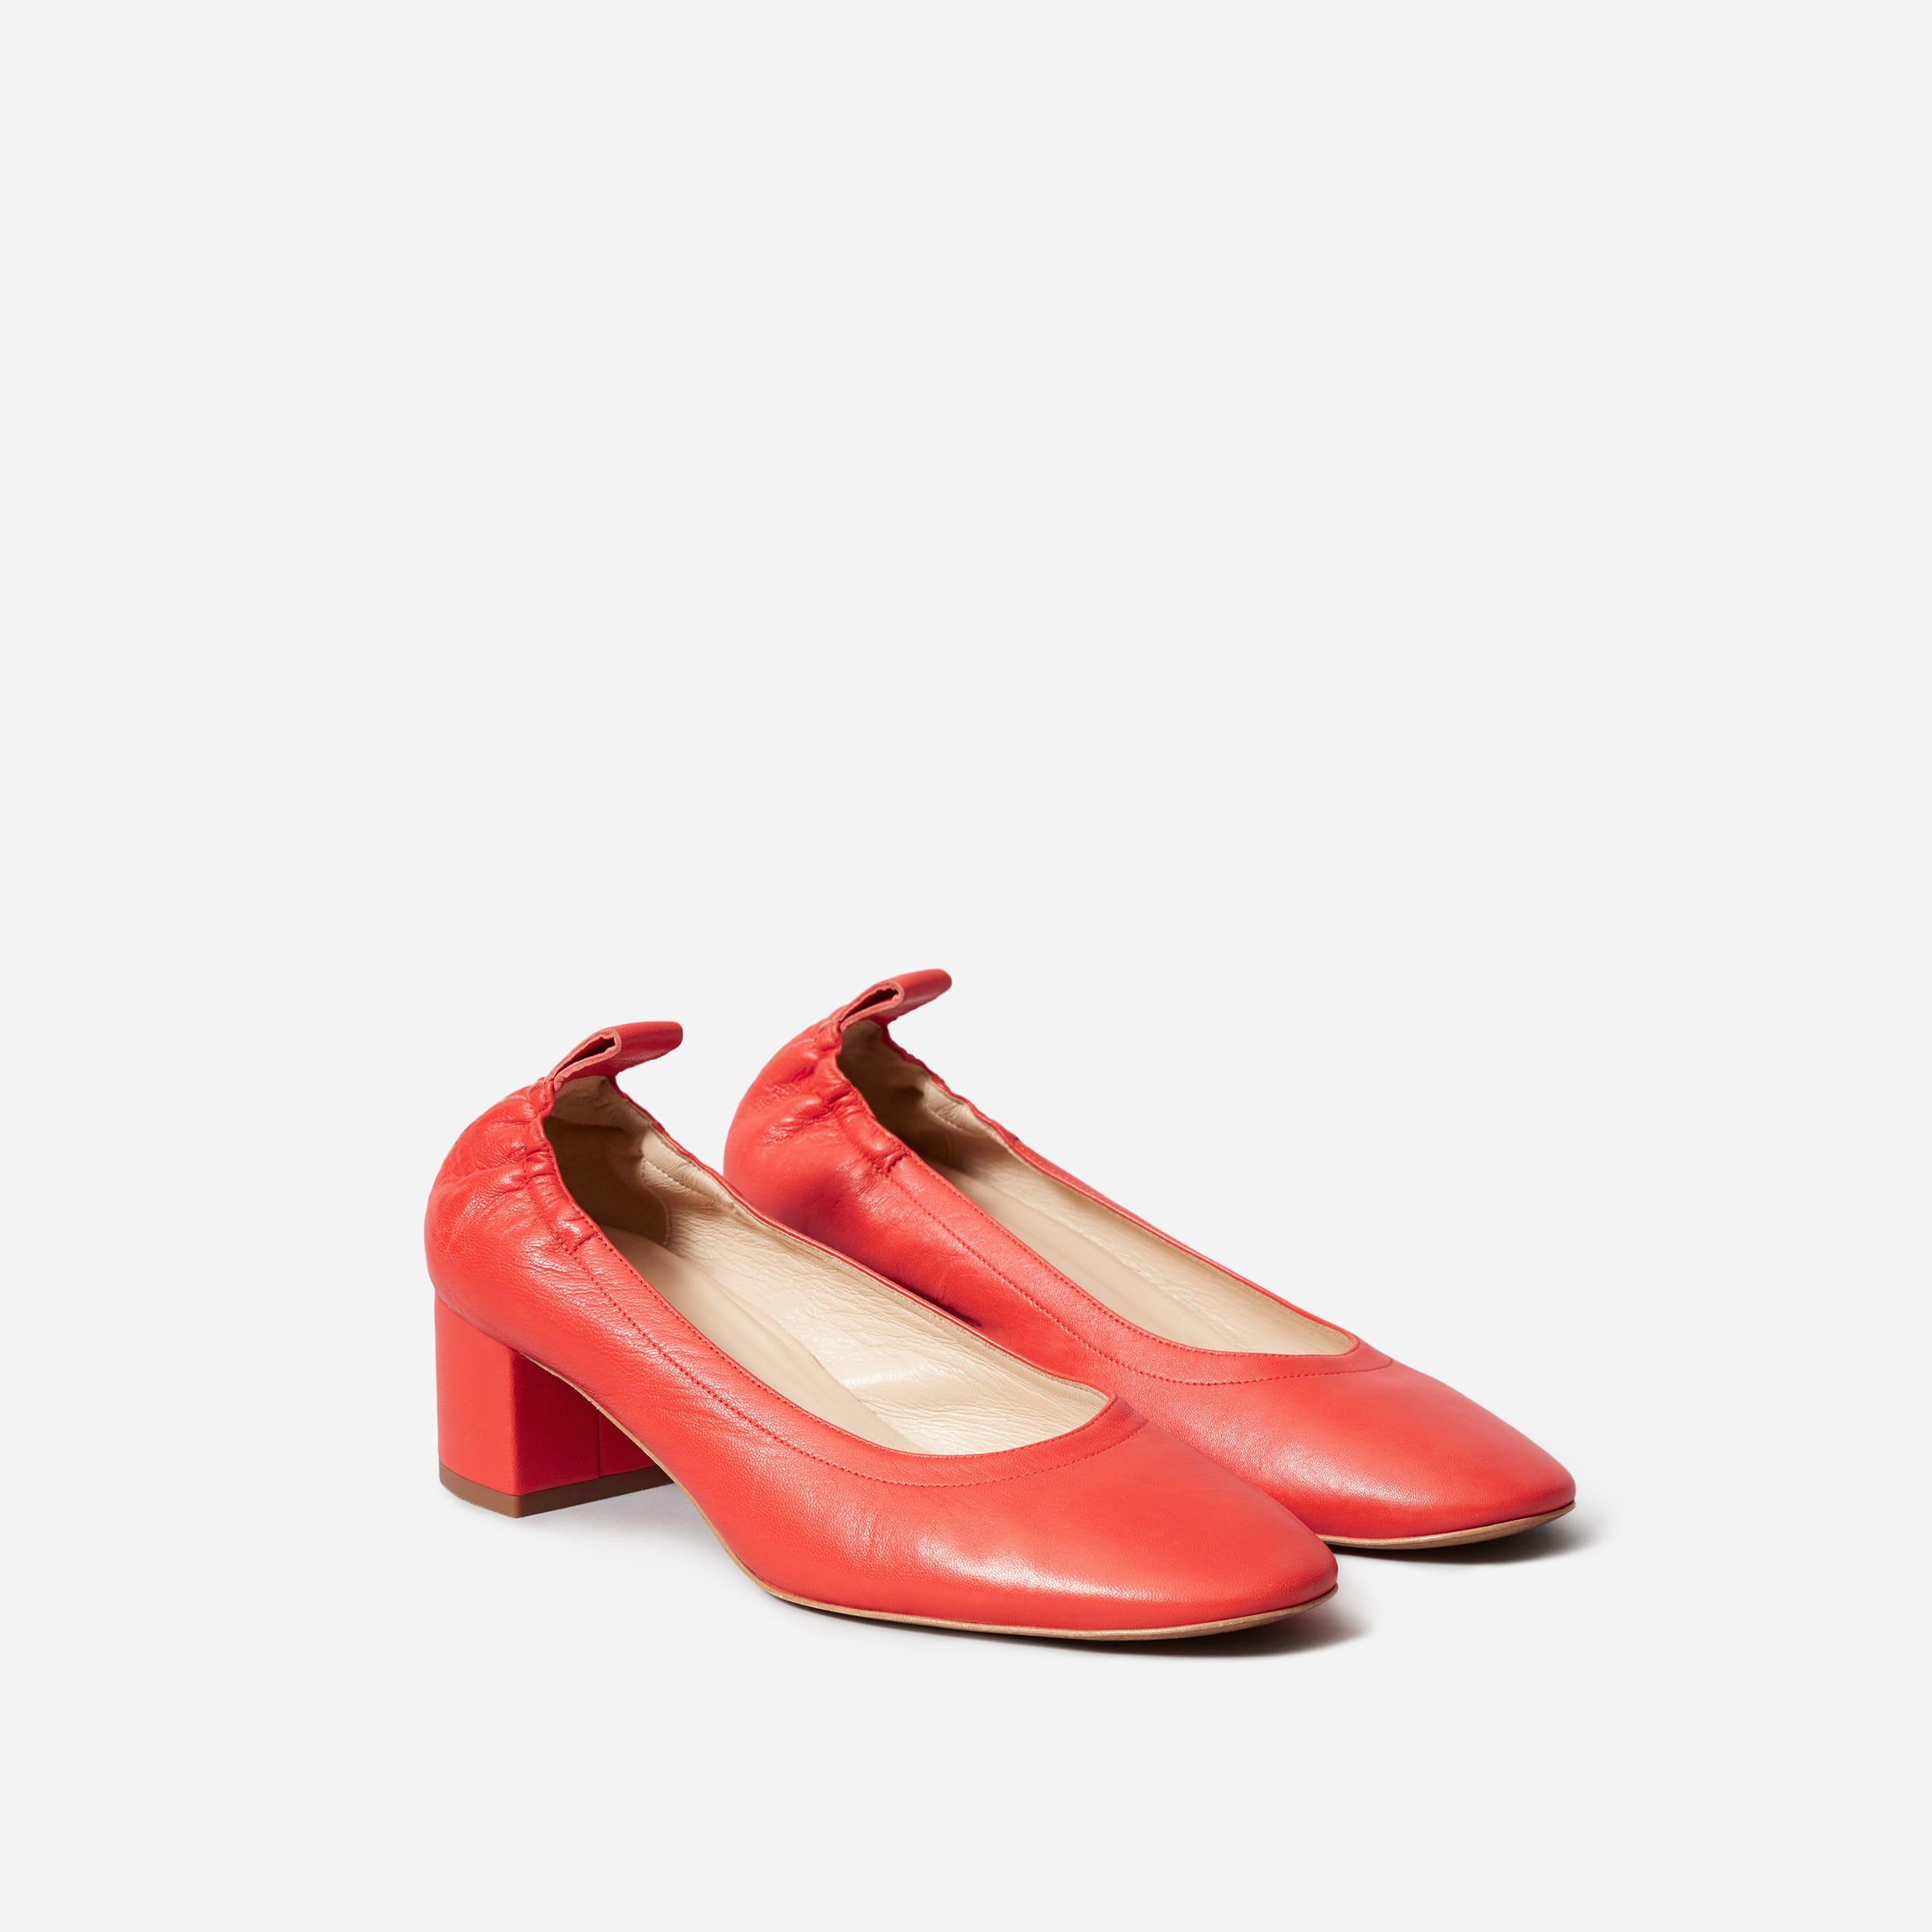 everlane red suede day heel